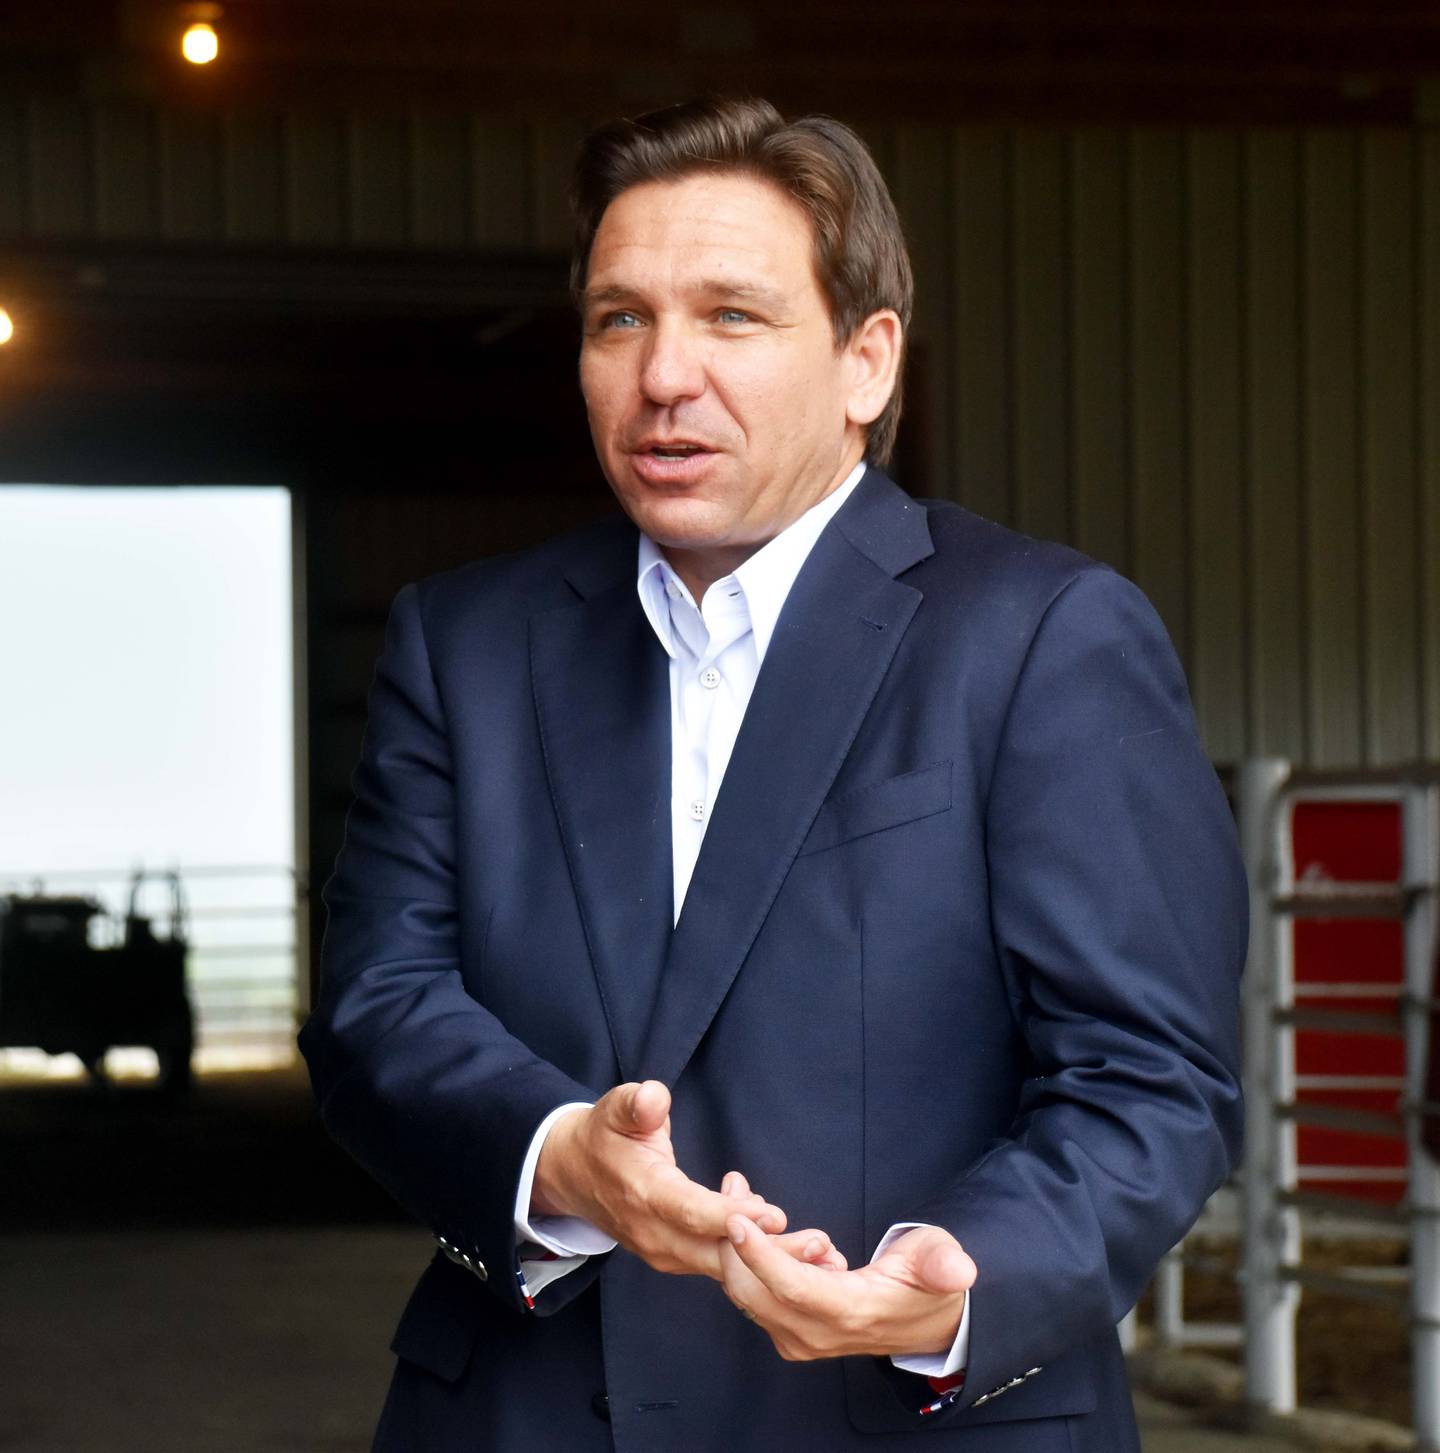 DeSantis spoke personally with many of the farmers and employees present.